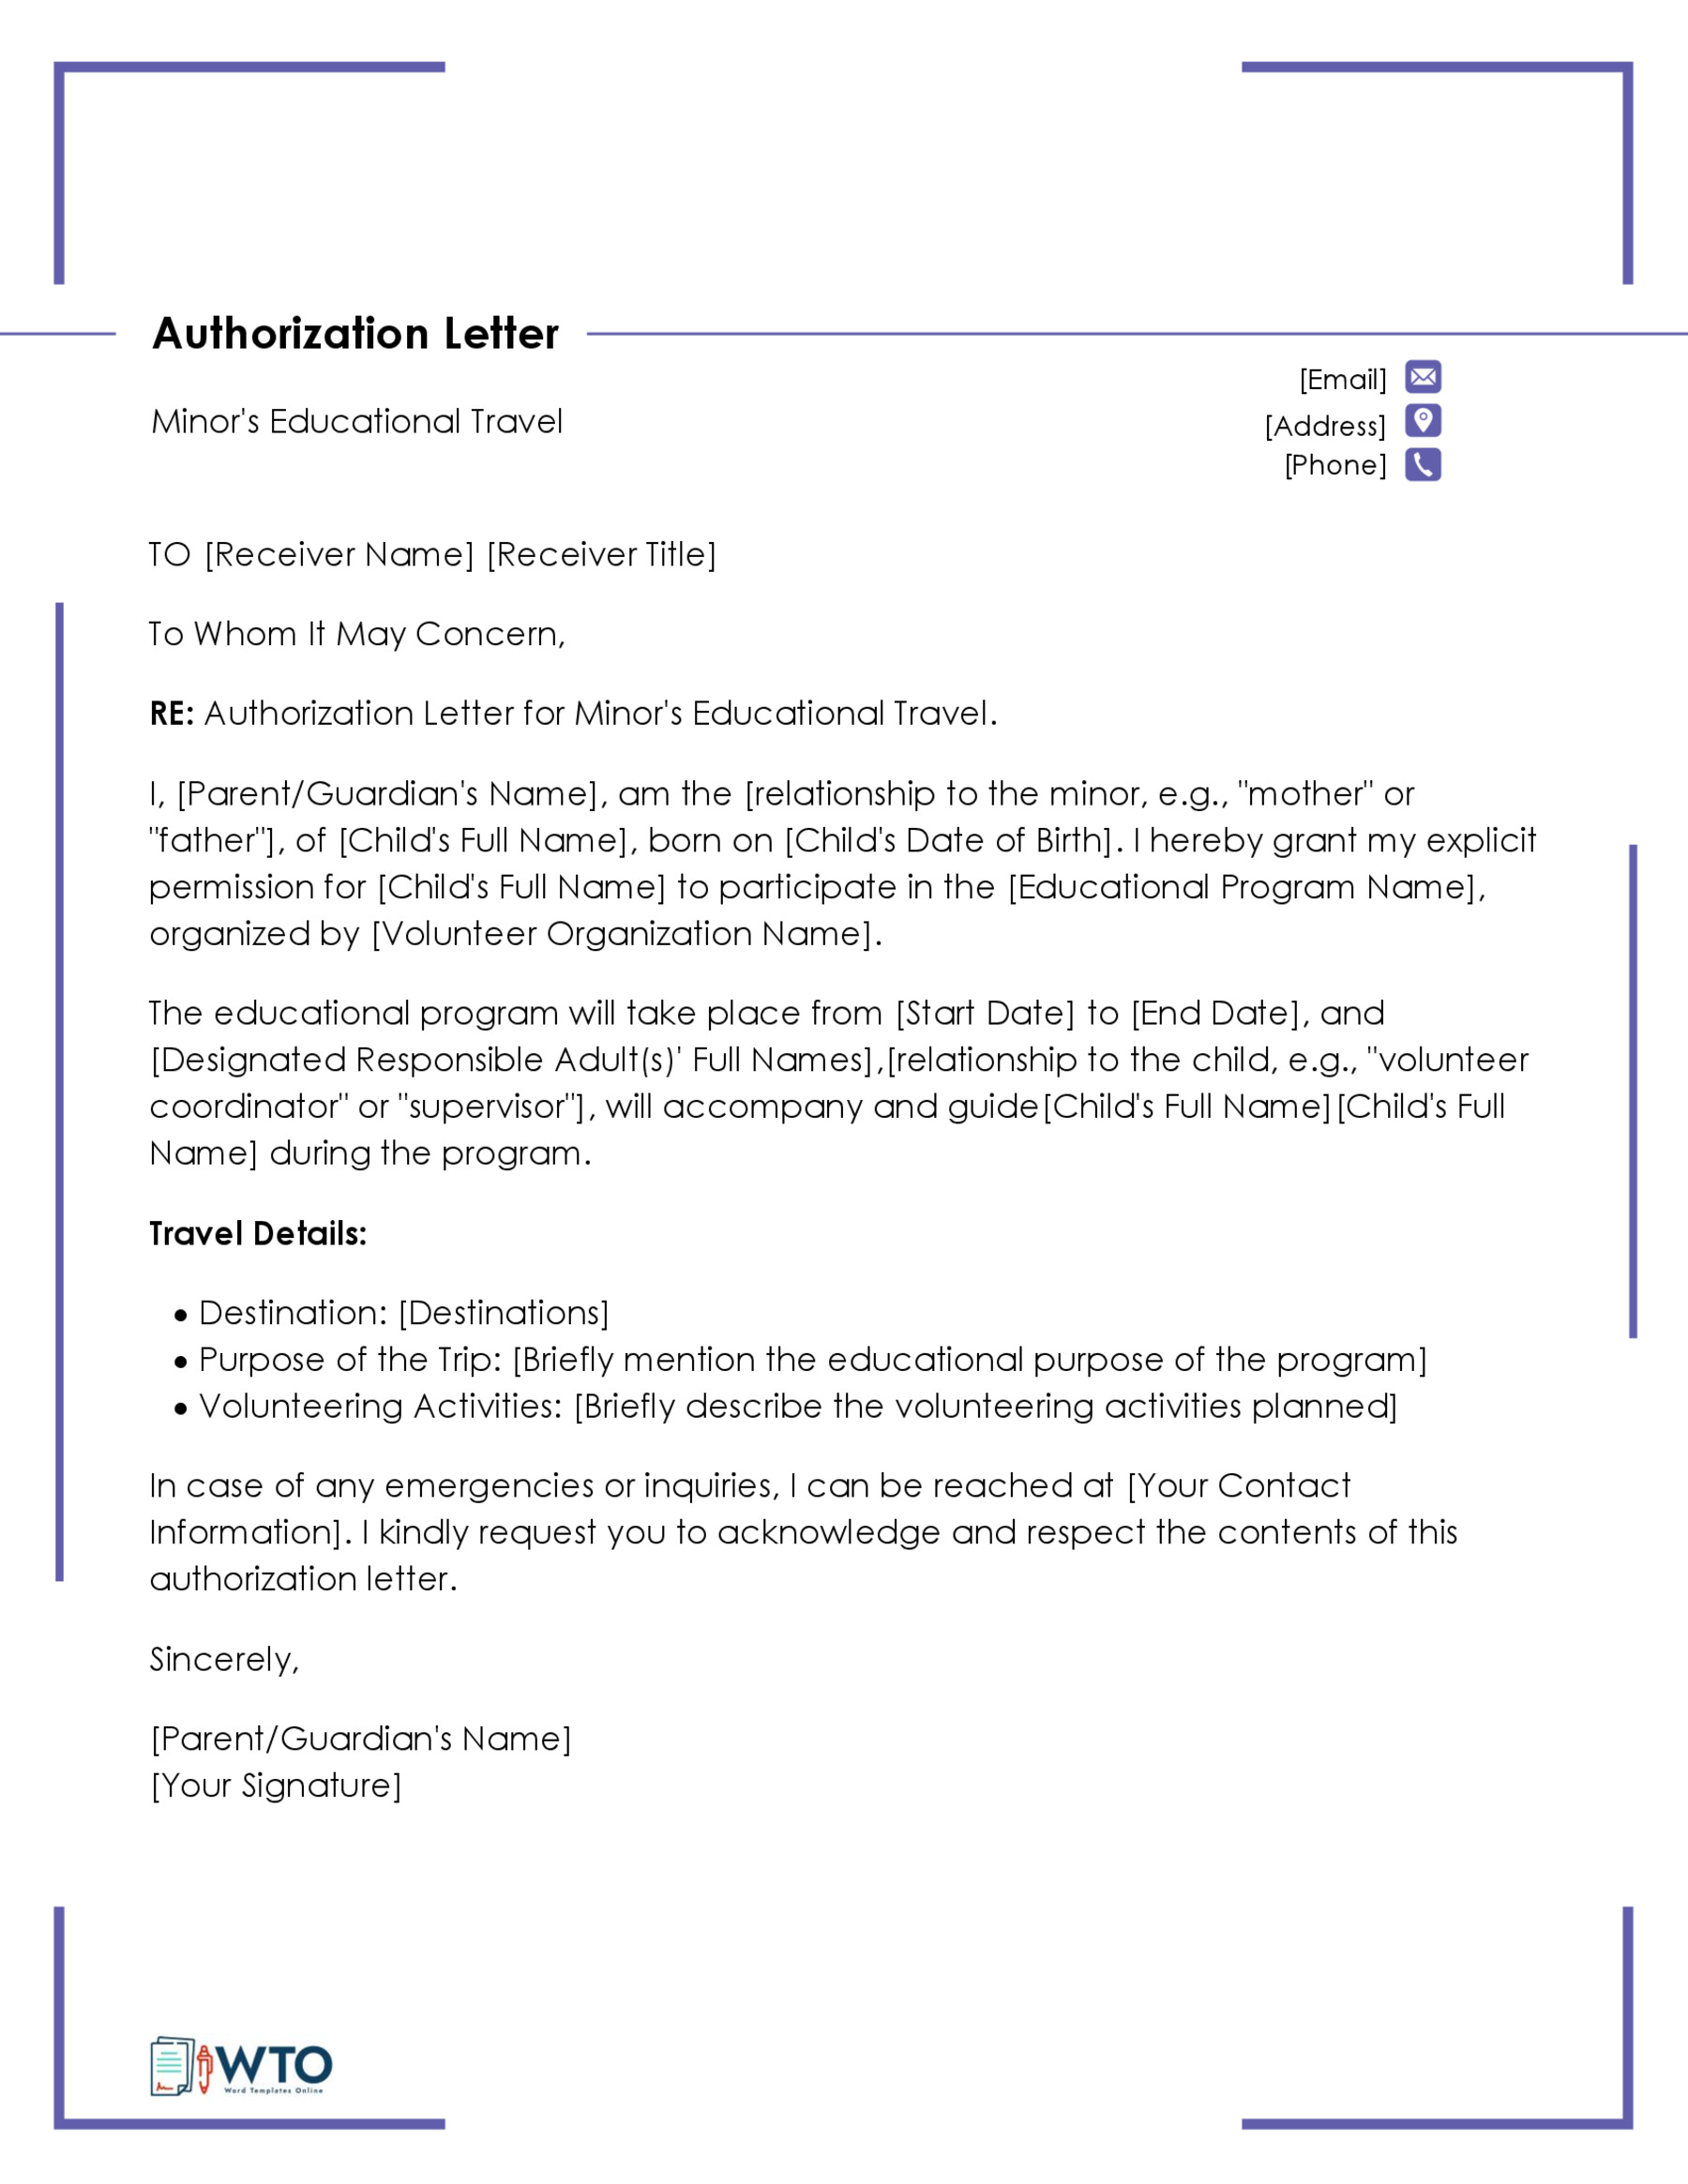 Authorization Letter toTravel with Minor Template-Free Downloadable